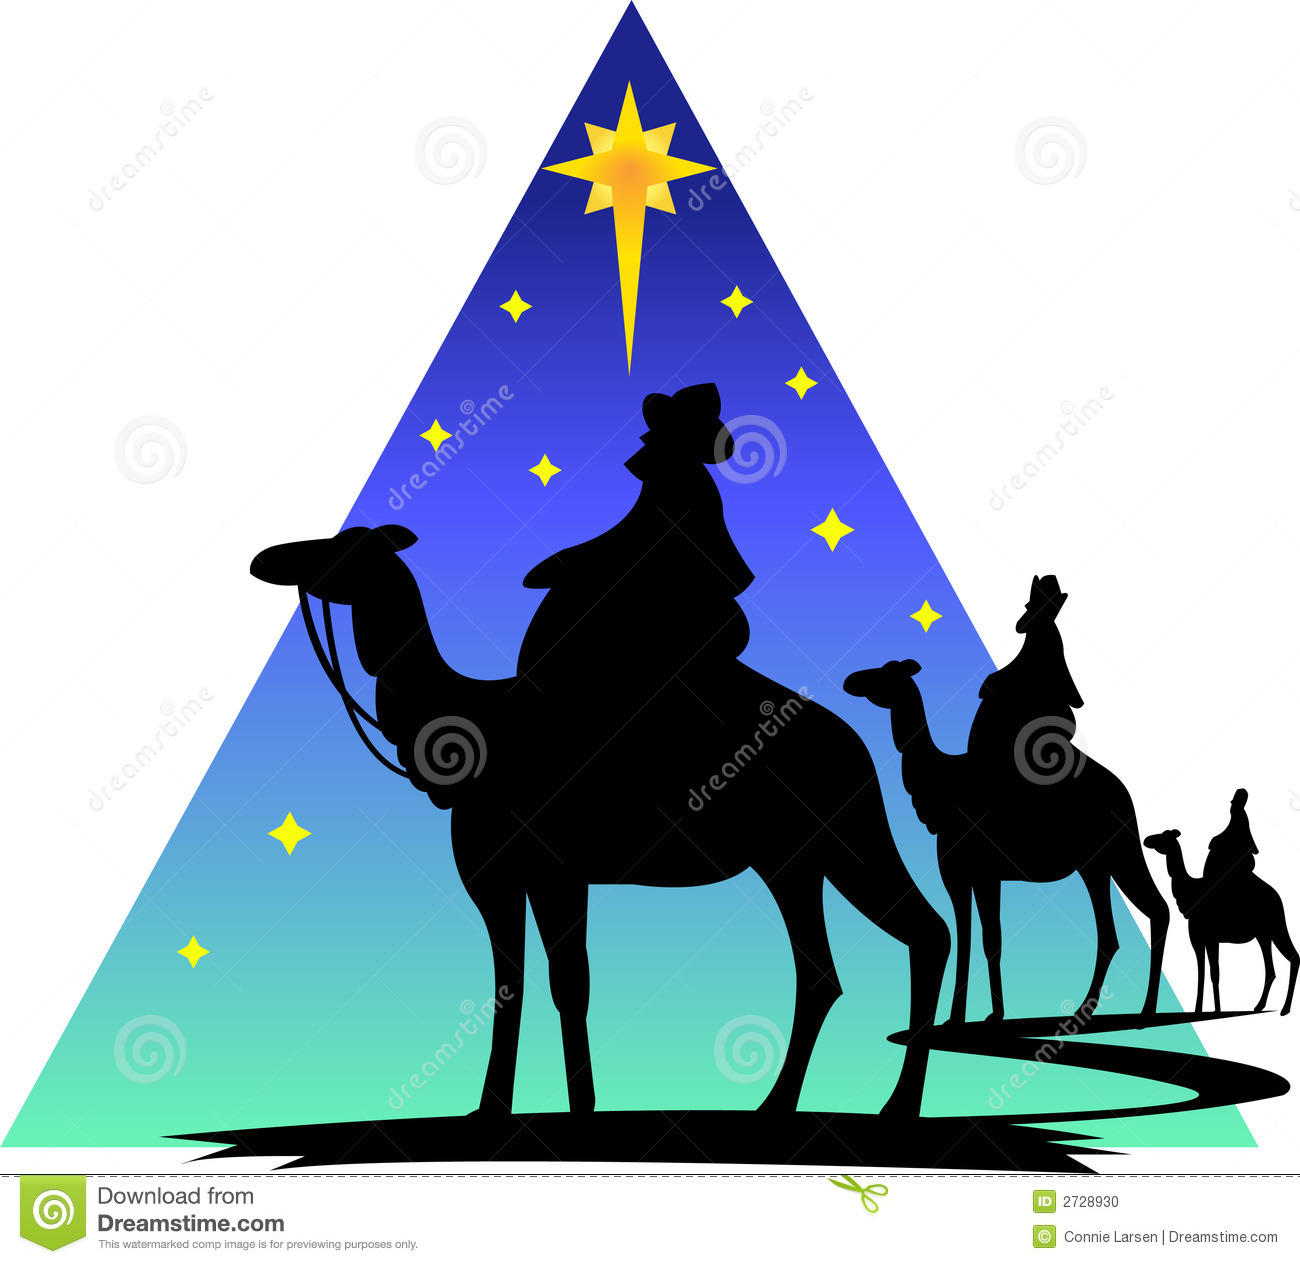 Illustration Of The Three Wisemen Following The Star Of Bethlehem To